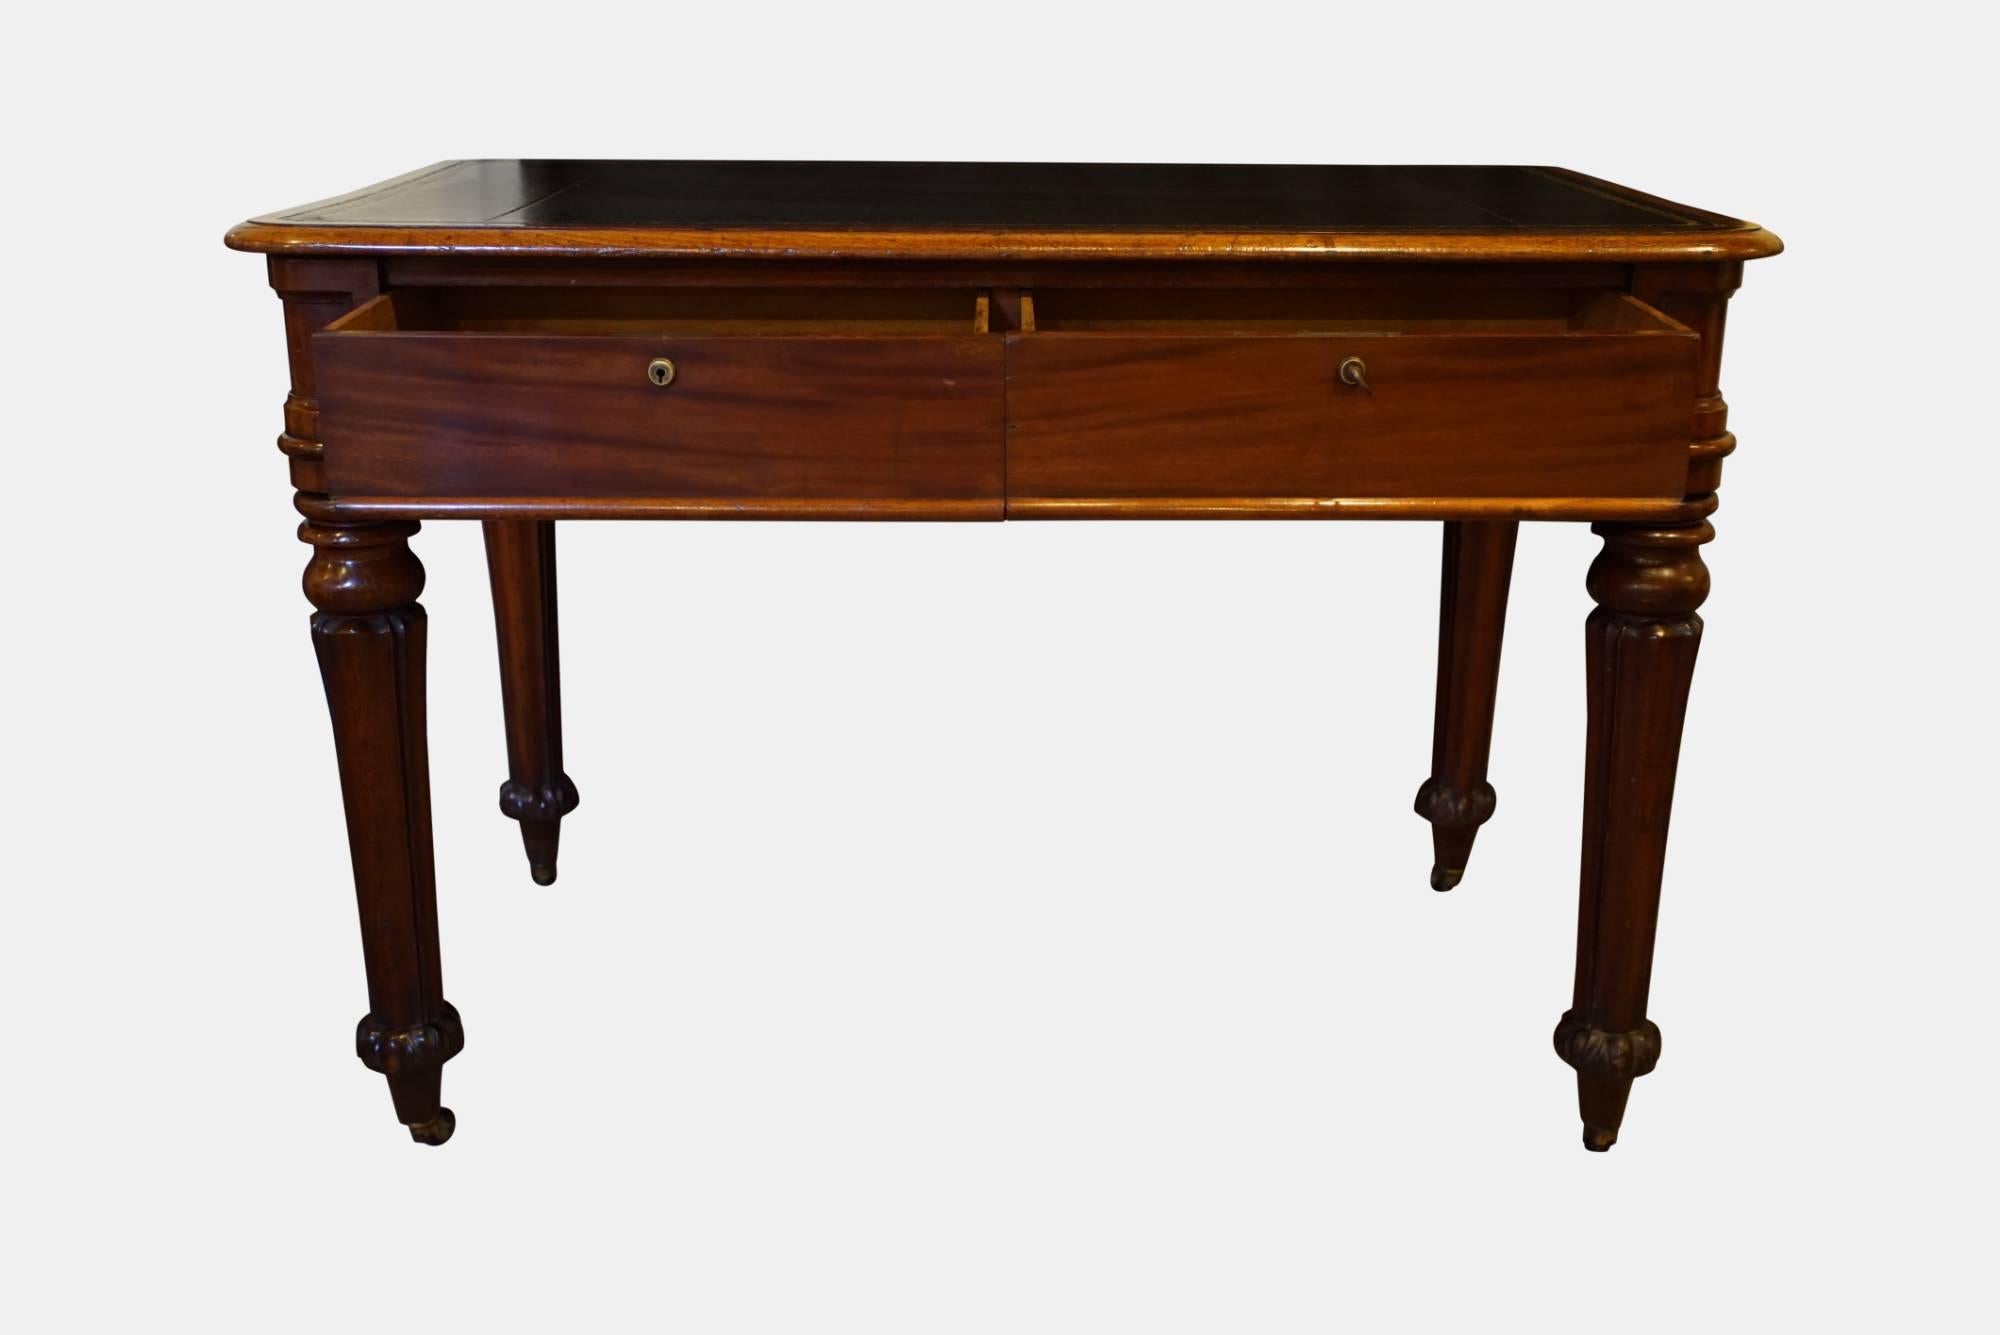 A William IV mahogany partners writing table of small size with 4 drawers, raised on carved reeded legs with panelled corners,


circa 1835.